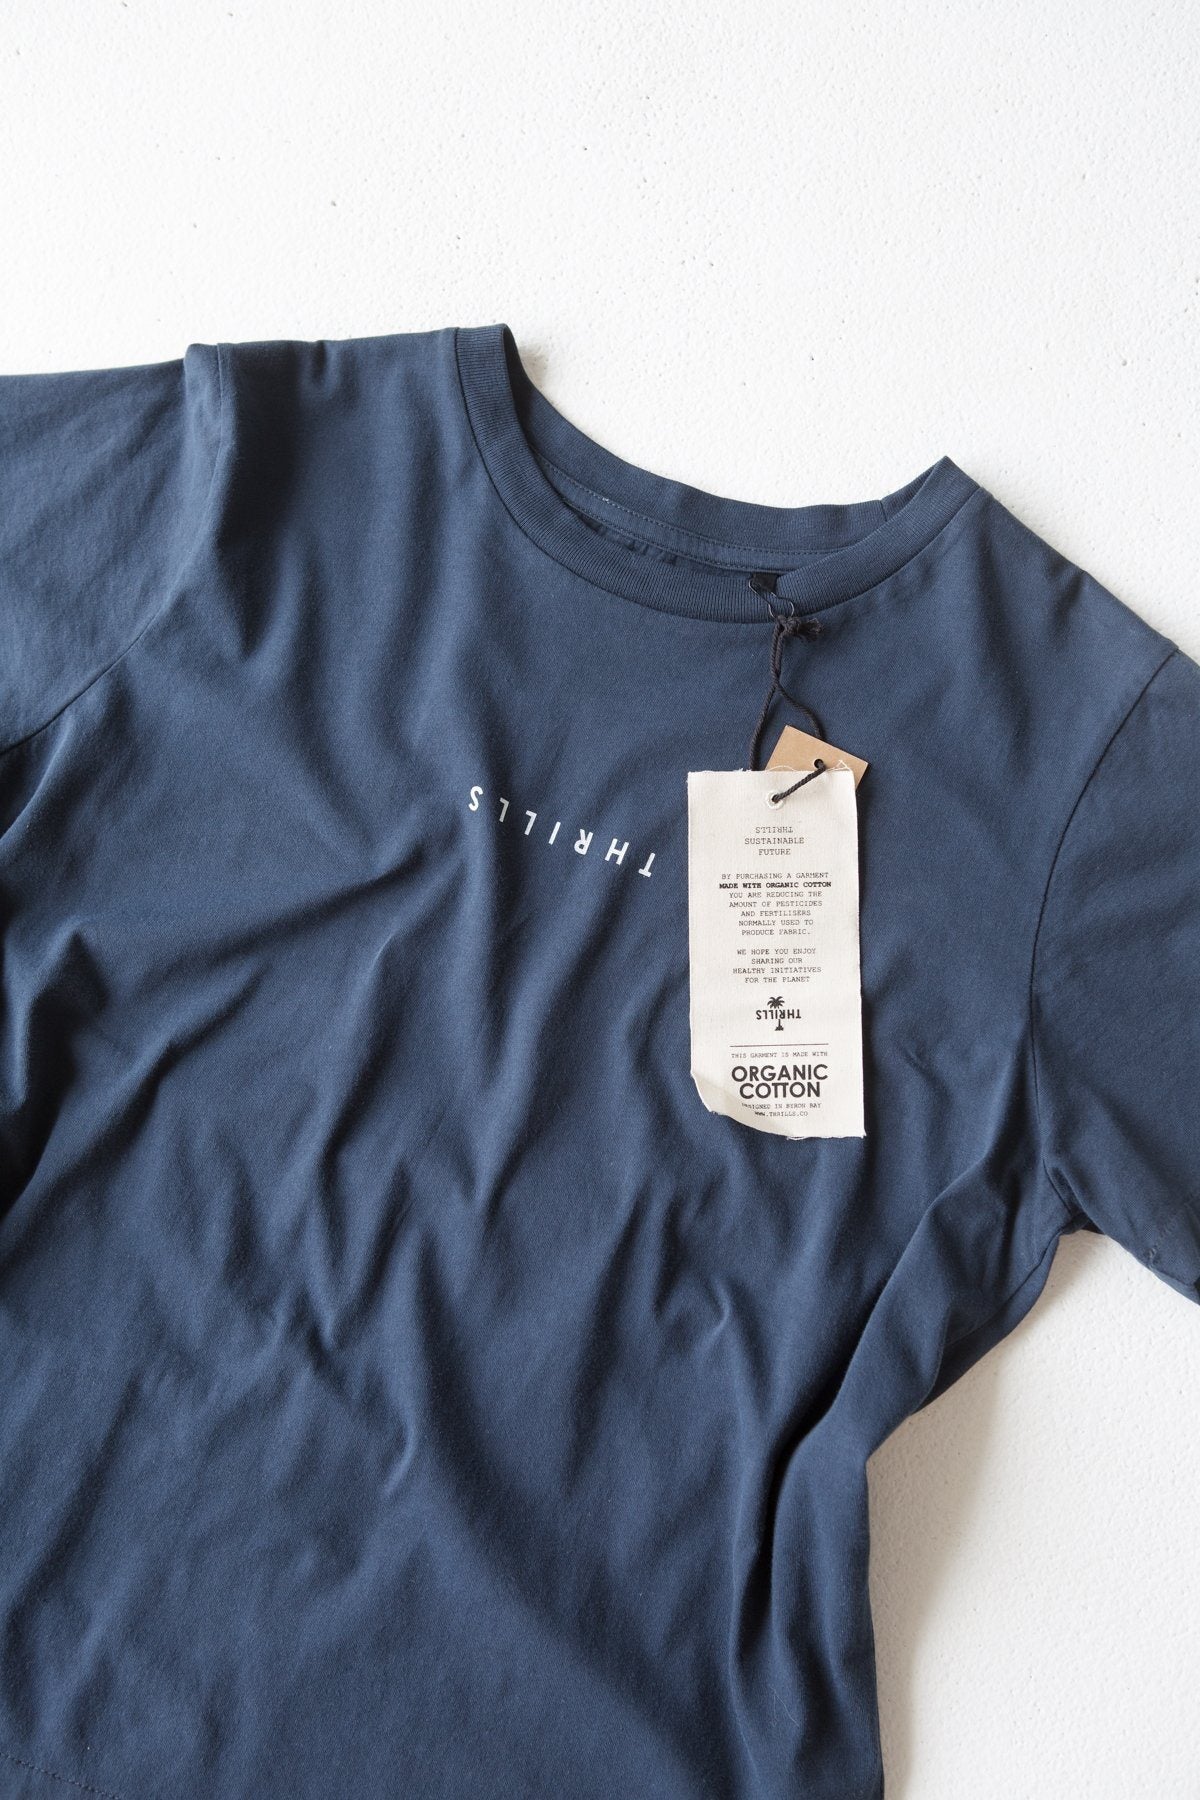 Minimal Thrills Relaxed Tee - Ink Navy